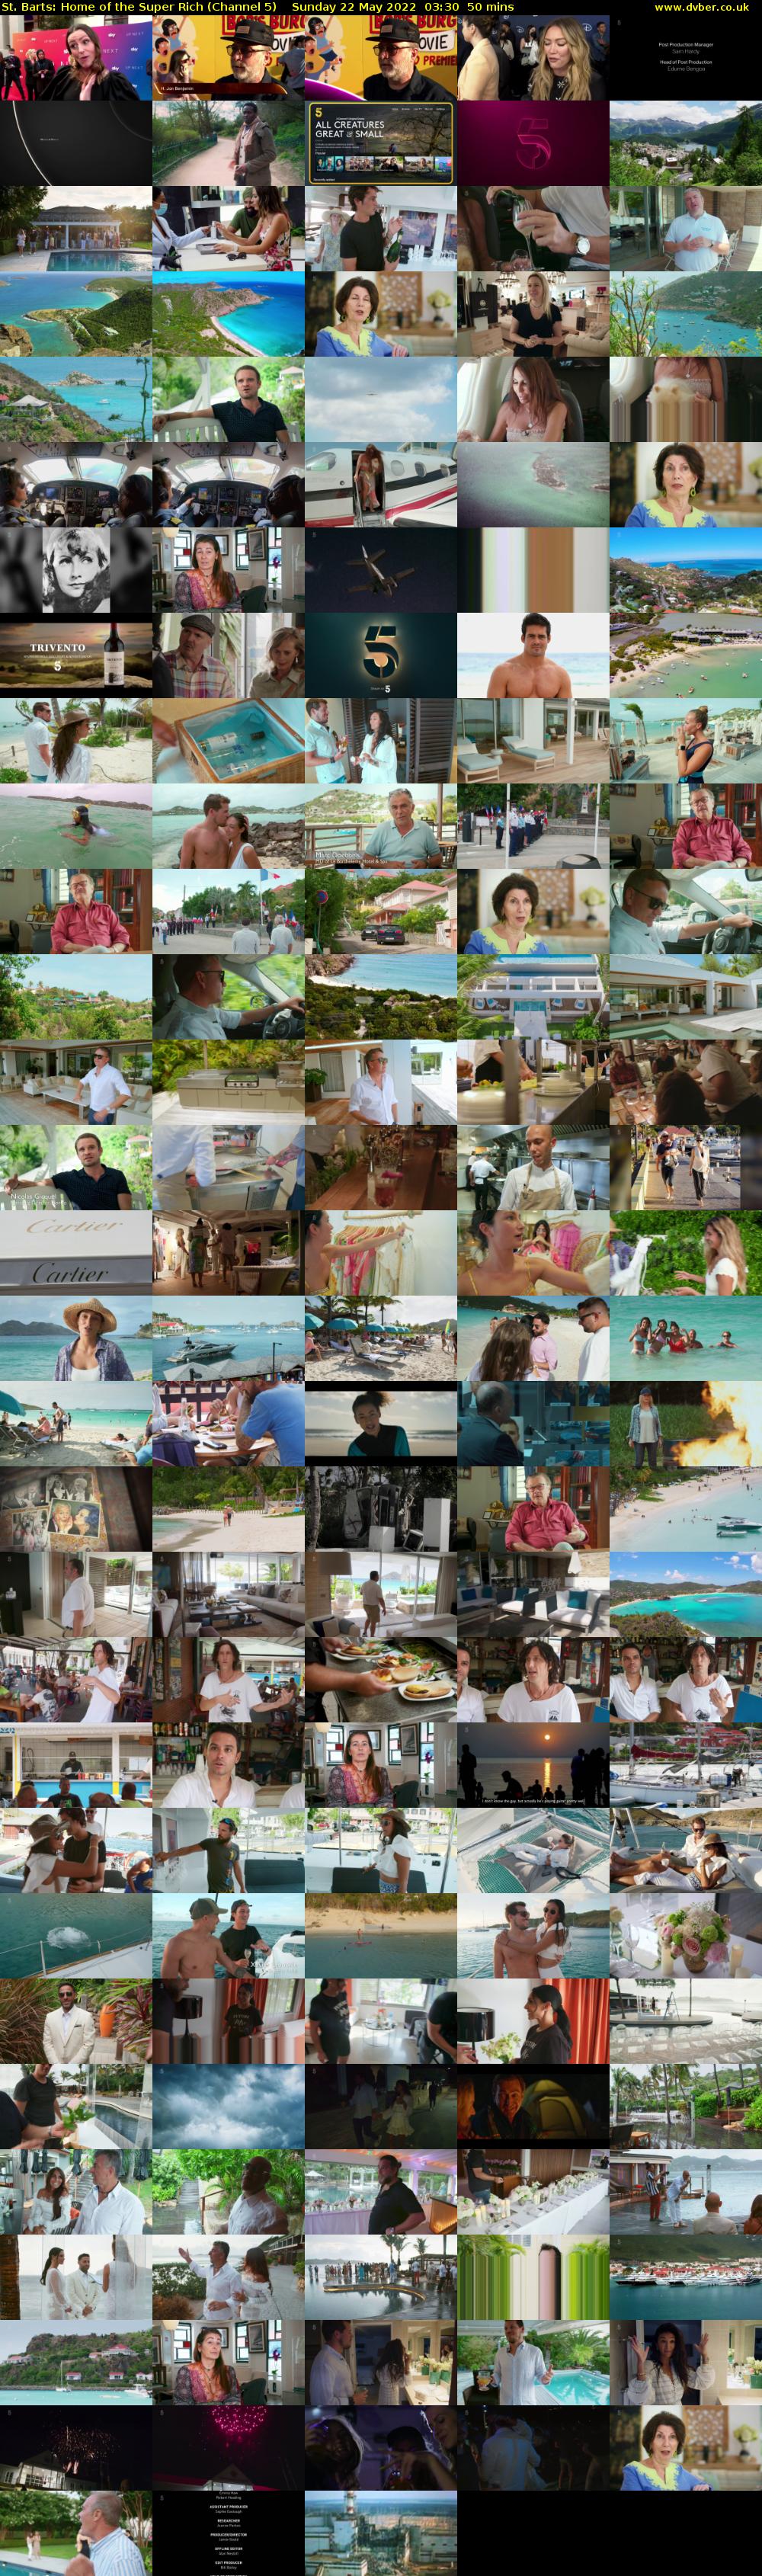 St. Barts: Home of the Super Rich (Channel 5) Sunday 22 May 2022 03:30 - 04:20